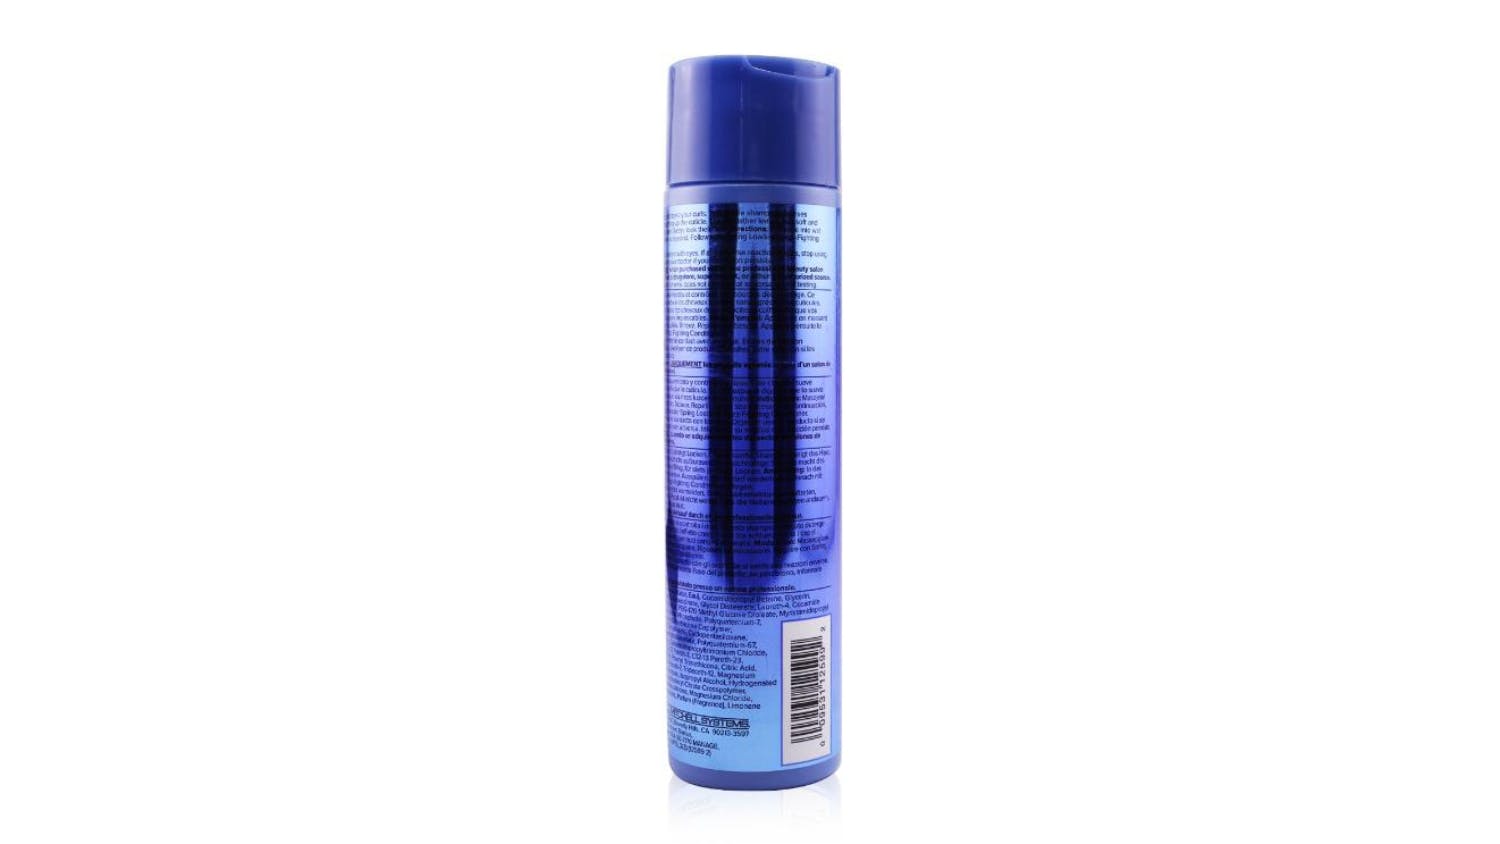 Paul Mitchell Spring Loaded Frizz-Fighting Shampoo (Cleanses Curls, Tames Frizz) - 250ml/8.5oz